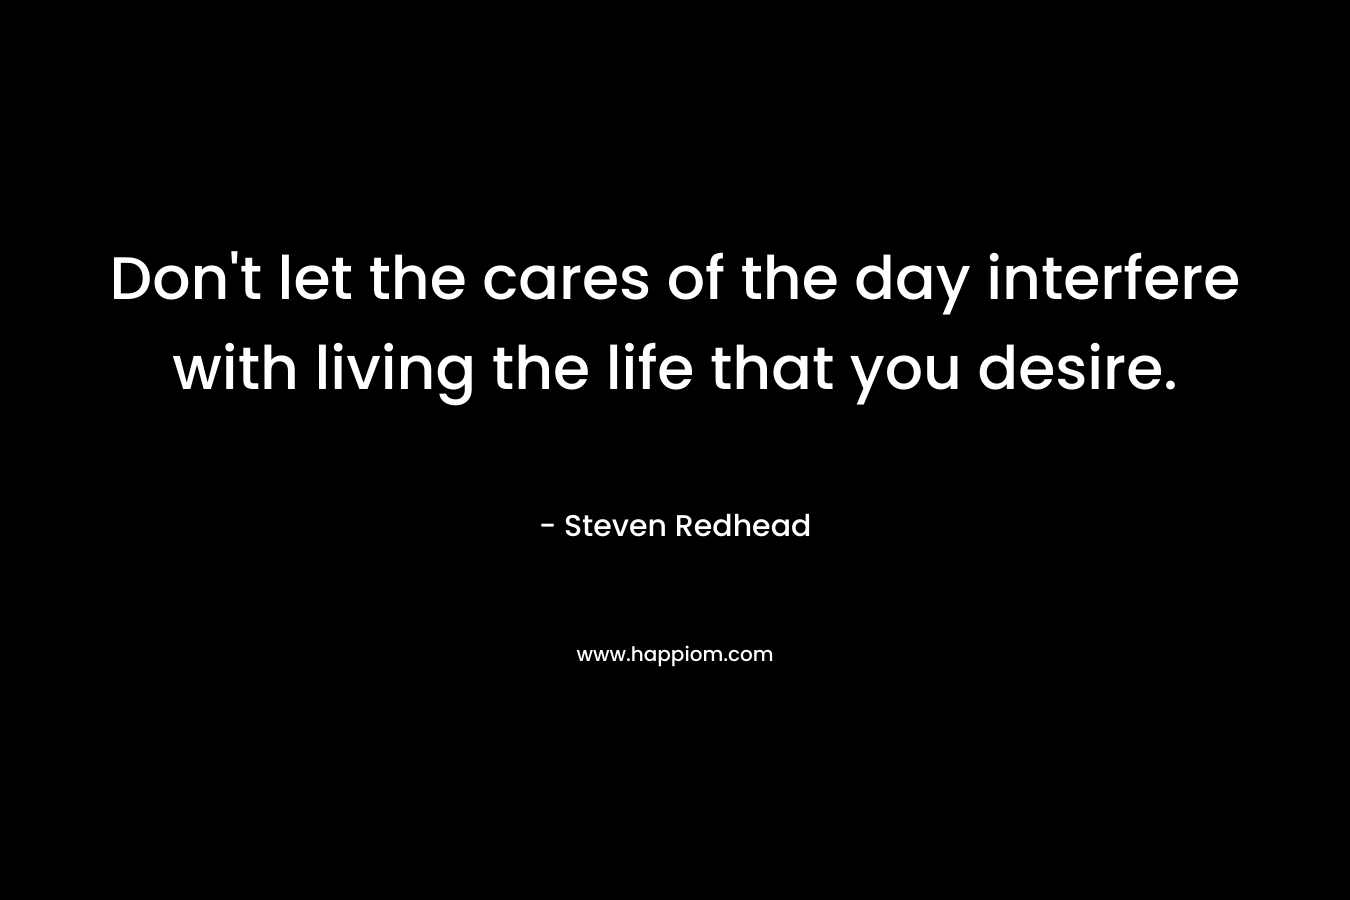 Don't let the cares of the day interfere with living the life that you desire.